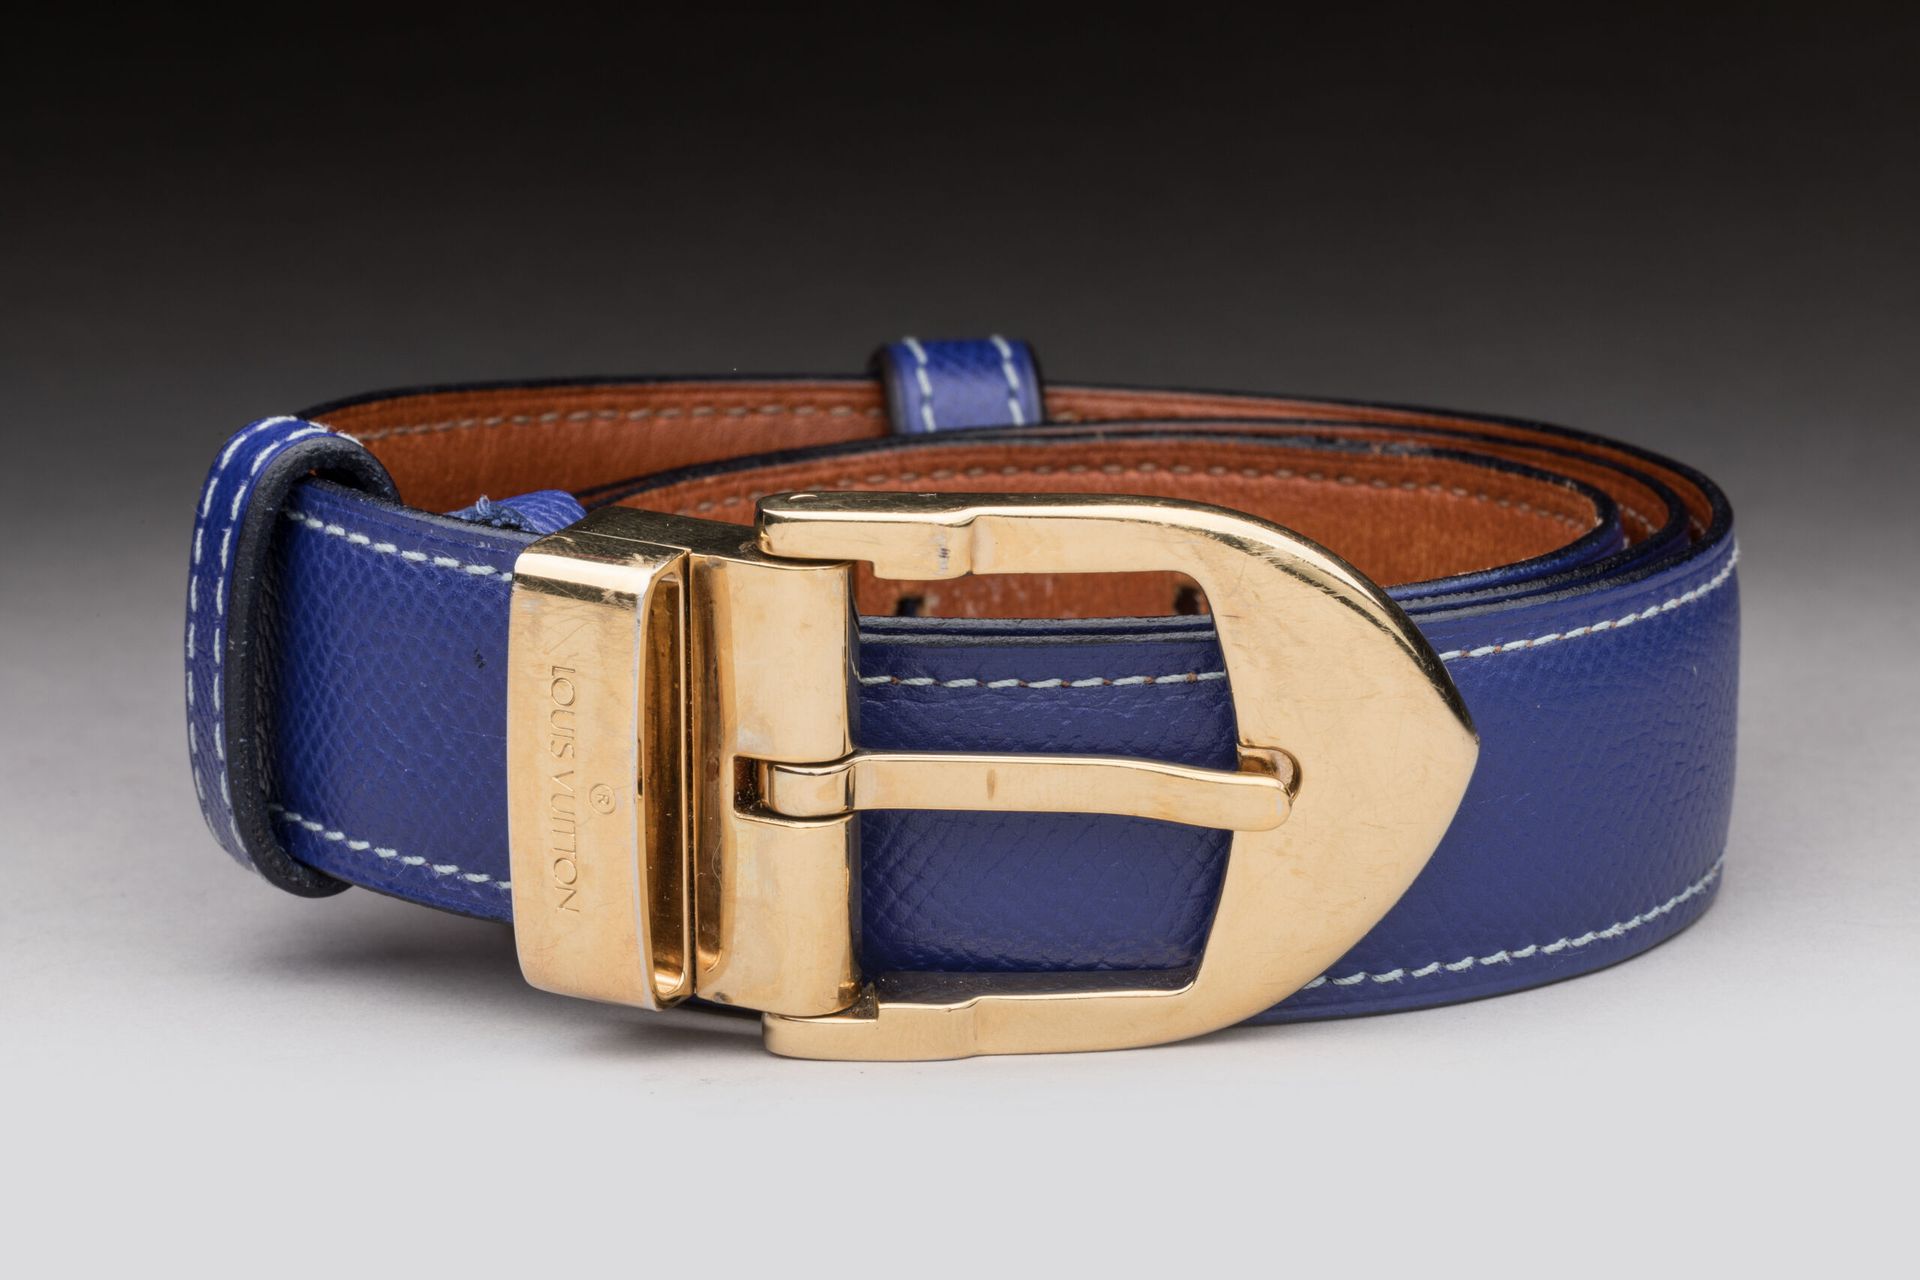 LOUIS VUITTON - Blue leather woman's belt with gold buck…